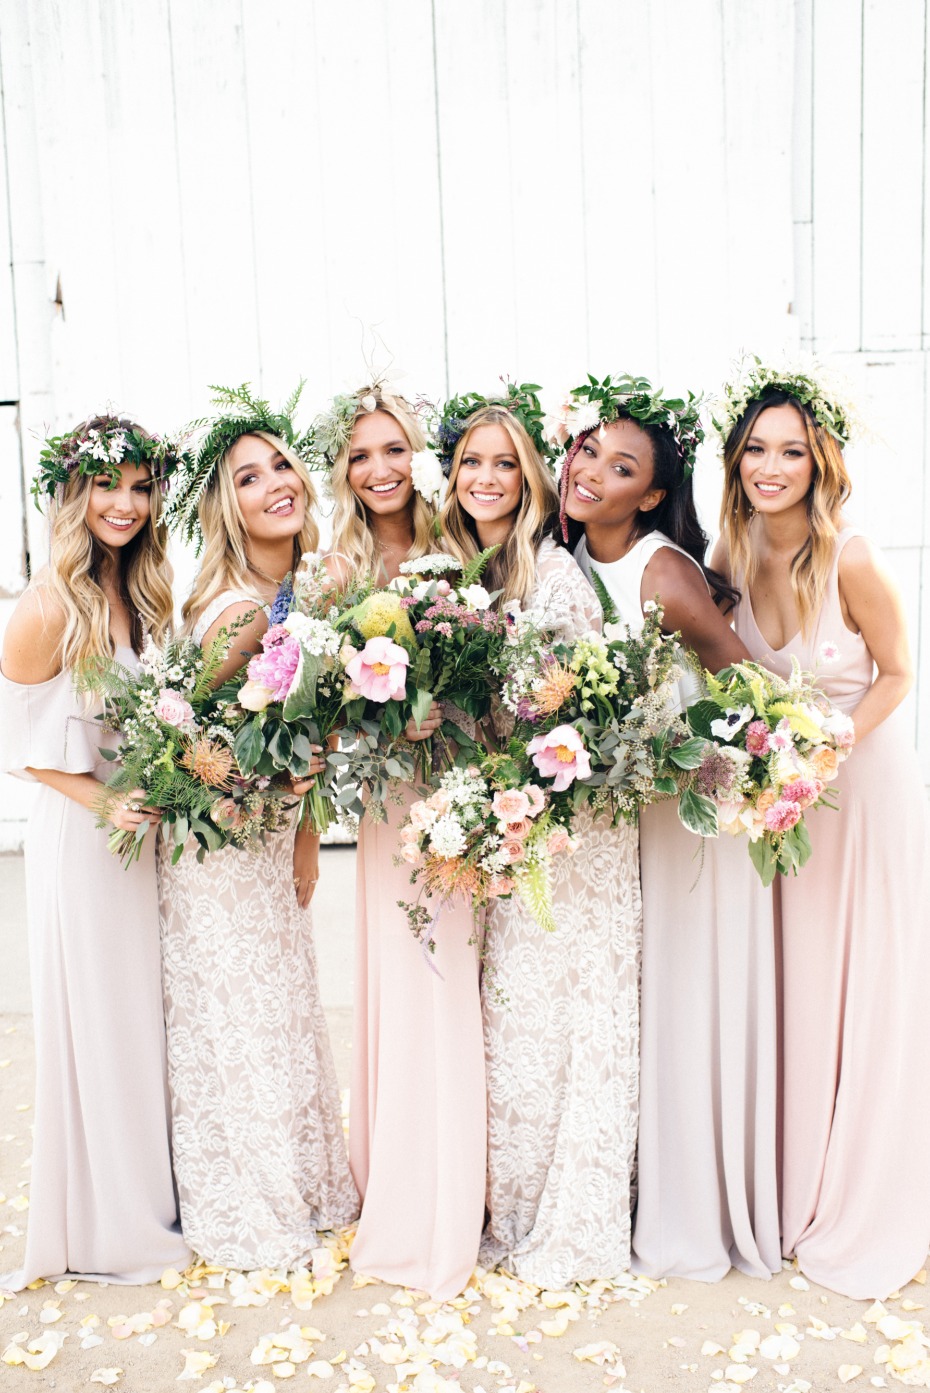 pink bridesmaid dresses and lace bridesmaid dresses for the maids of honor